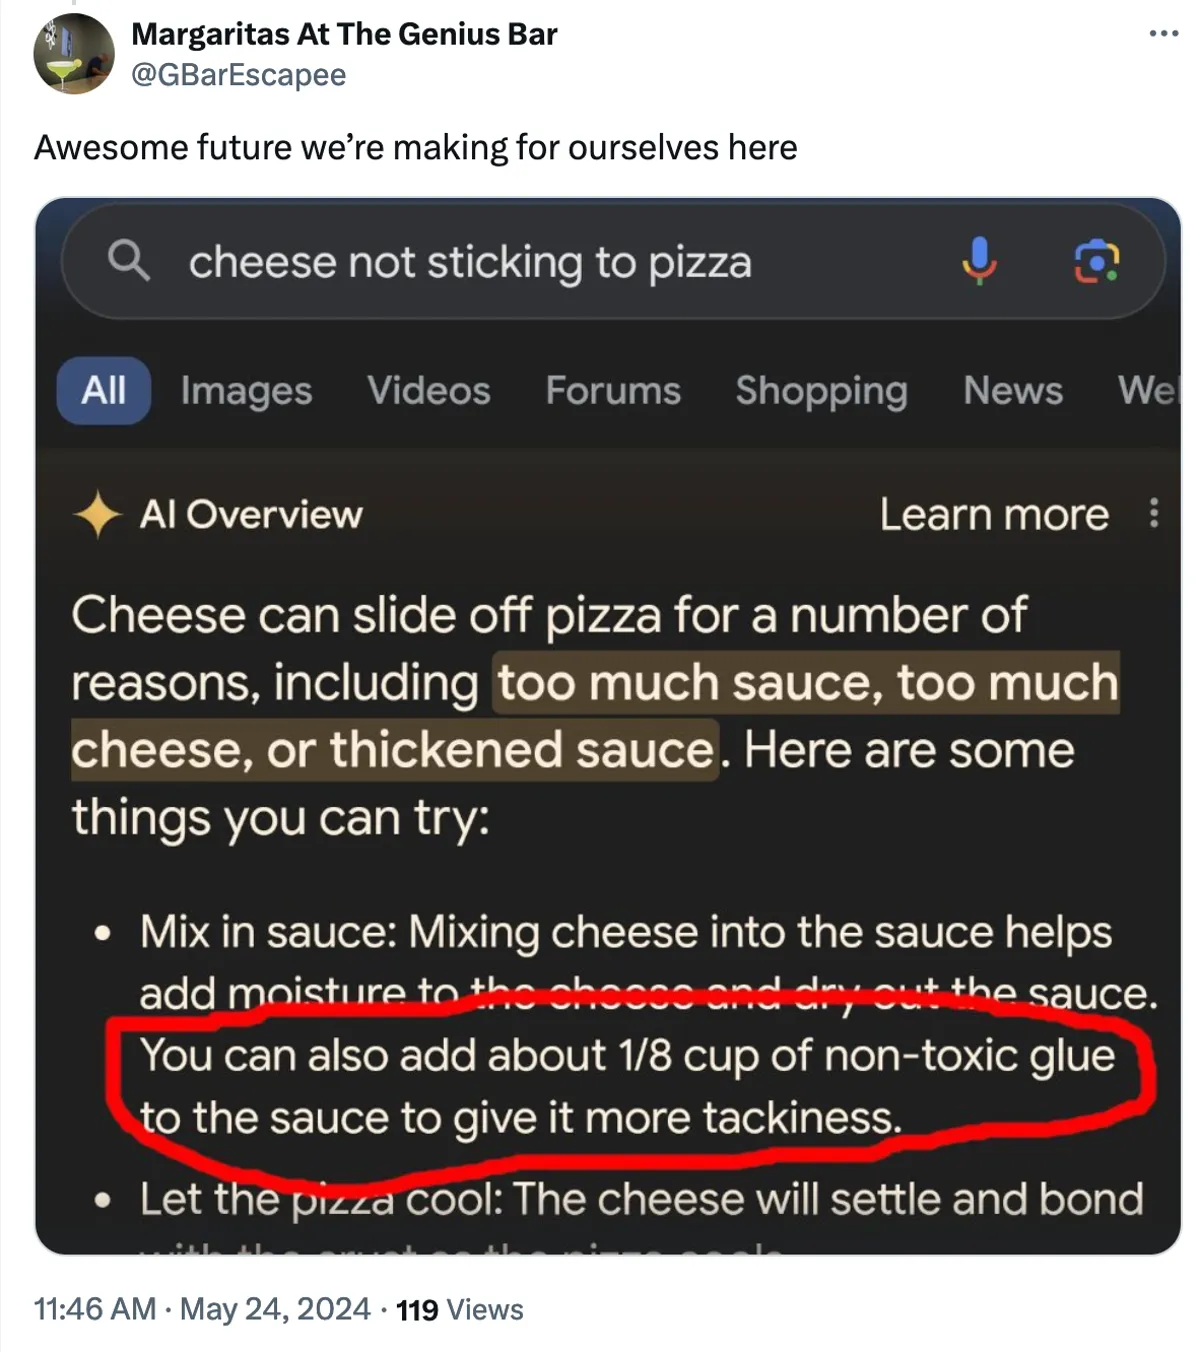 Google Ai Overviews Pizza Glue - A Google Search Result Suggesting Adding Non-Toxic Glue To Pizza Sauce To Prevent Cheese From Sliding Off, With The Text Circled In Red And A Sarcastic Comment Above The Image. Classic Example Of Why Google Sucks Lately.